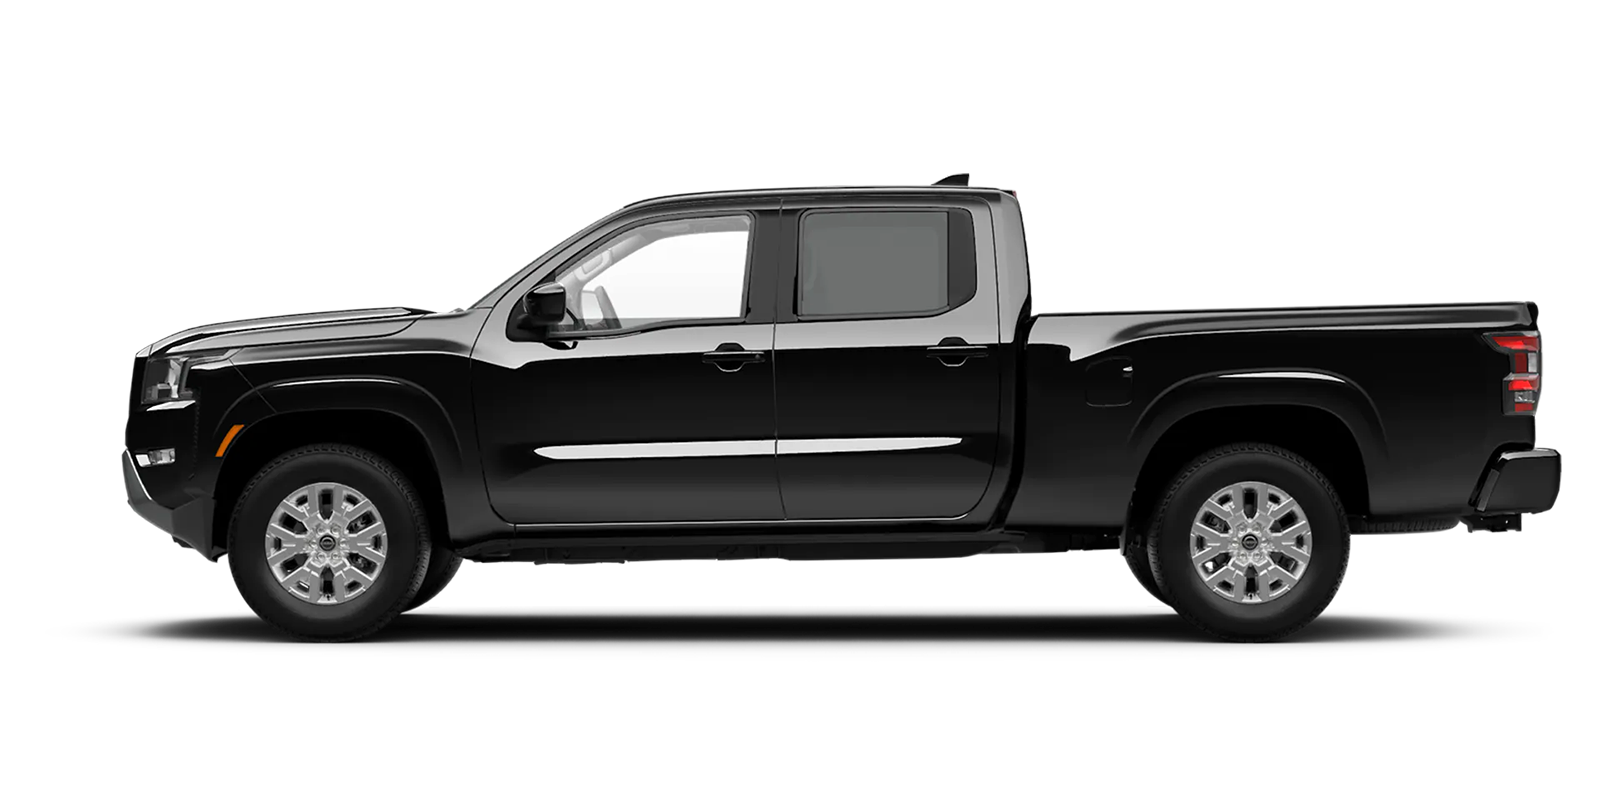 2022 Frontier Crew Cab Long Bed SV 4x2 in Super Black | Rolling Hills Nissan in Saint Joseph MO